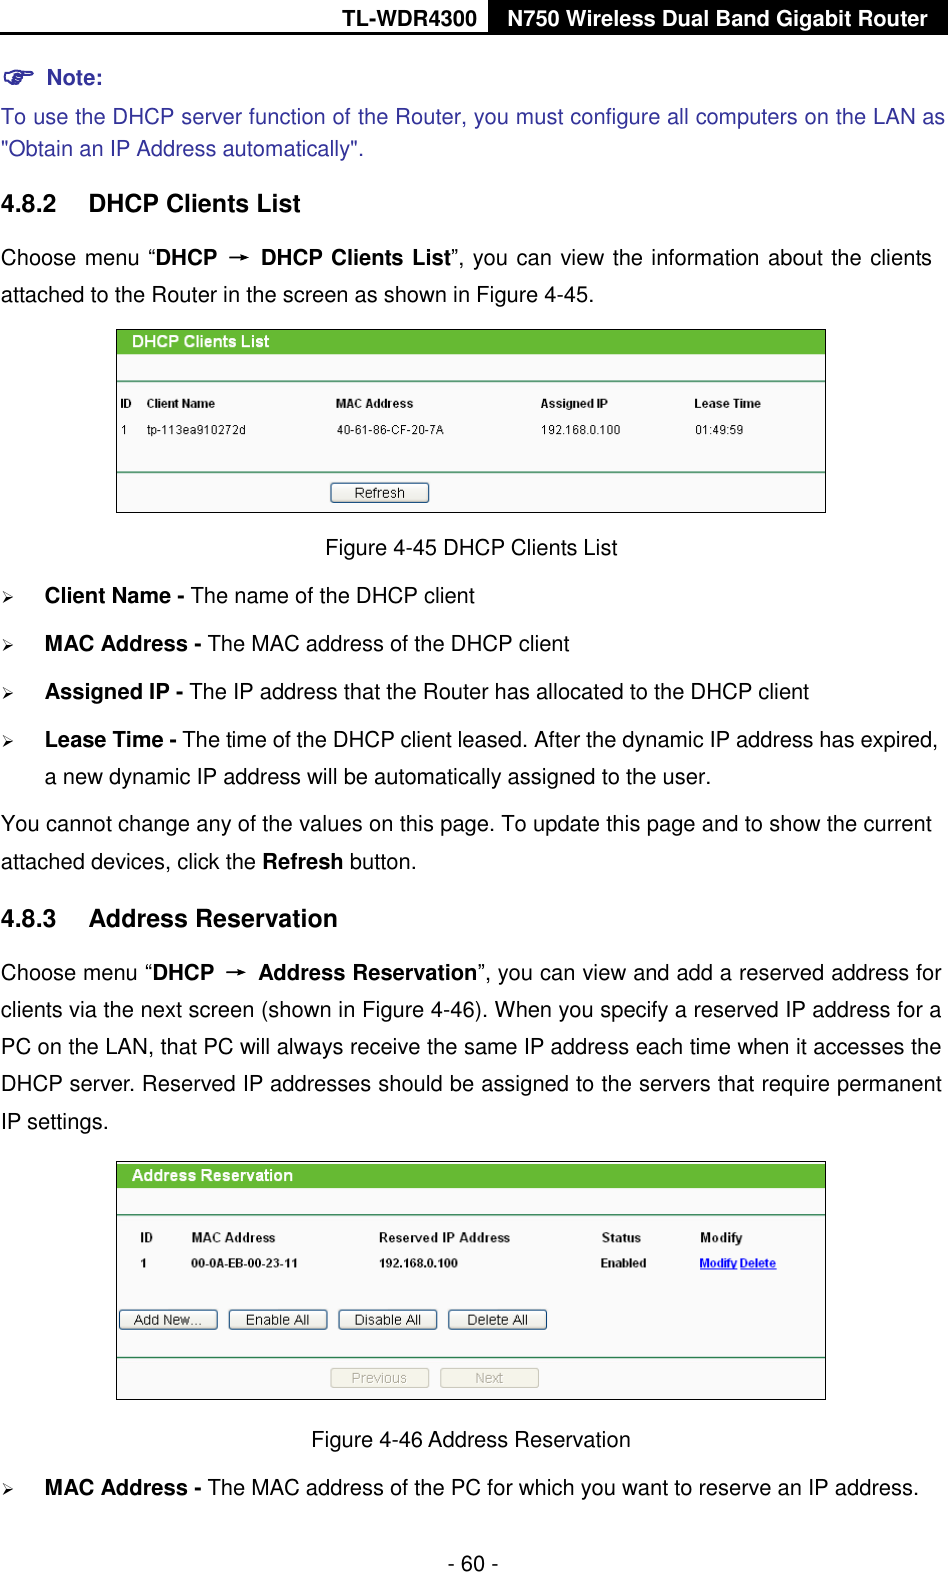 TL-WDR4300 N750 Wireless Dual Band Gigabit Router  - 60 -  Note: To use the DHCP server function of the Router, you must configure all computers on the LAN as &quot;Obtain an IP Address automatically&quot;. 4.8.2  DHCP Clients List Choose menu “DHCP  →  DHCP Clients List”, you can view the information about the clients attached to the Router in the screen as shown in Figure 4-45.  Figure 4-45 DHCP Clients List  Client Name - The name of the DHCP client    MAC Address - The MAC address of the DHCP client    Assigned IP - The IP address that the Router has allocated to the DHCP client  Lease Time - The time of the DHCP client leased. After the dynamic IP address has expired, a new dynamic IP address will be automatically assigned to the user.     You cannot change any of the values on this page. To update this page and to show the current attached devices, click the Refresh button. 4.8.3  Address Reservation Choose menu “DHCP  →  Address Reservation”, you can view and add a reserved address for clients via the next screen (shown in Figure 4-46). When you specify a reserved IP address for a PC on the LAN, that PC will always receive the same IP address each time when it accesses the DHCP server. Reserved IP addresses should be assigned to the servers that require permanent IP settings.    Figure 4-46 Address Reservation  MAC Address - The MAC address of the PC for which you want to reserve an IP address. 